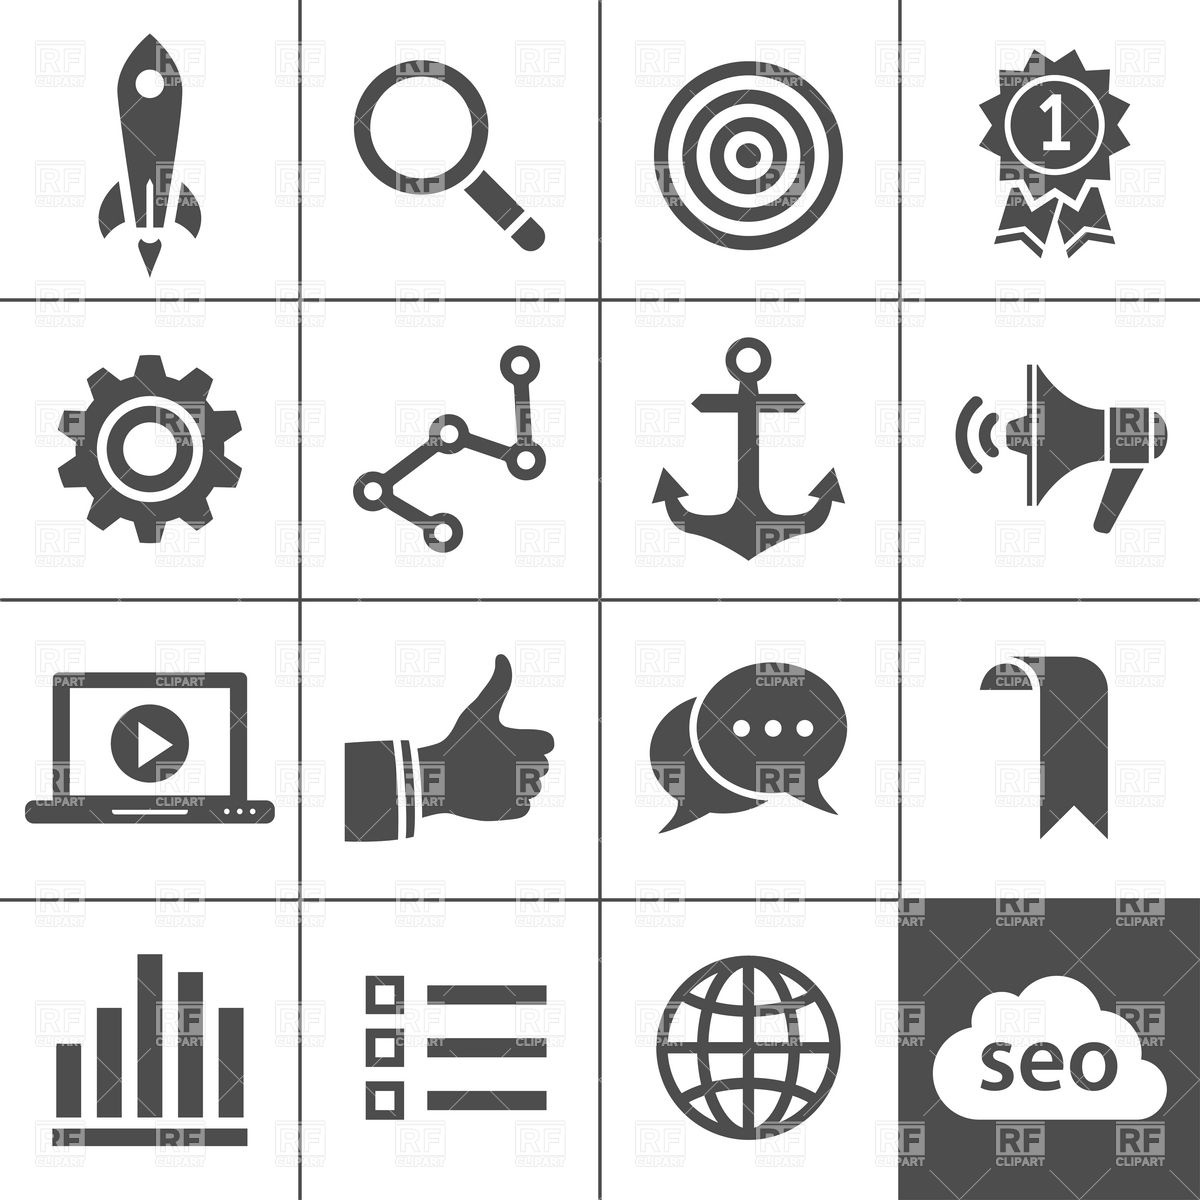 7 Marketing Icon Vector Gears Images